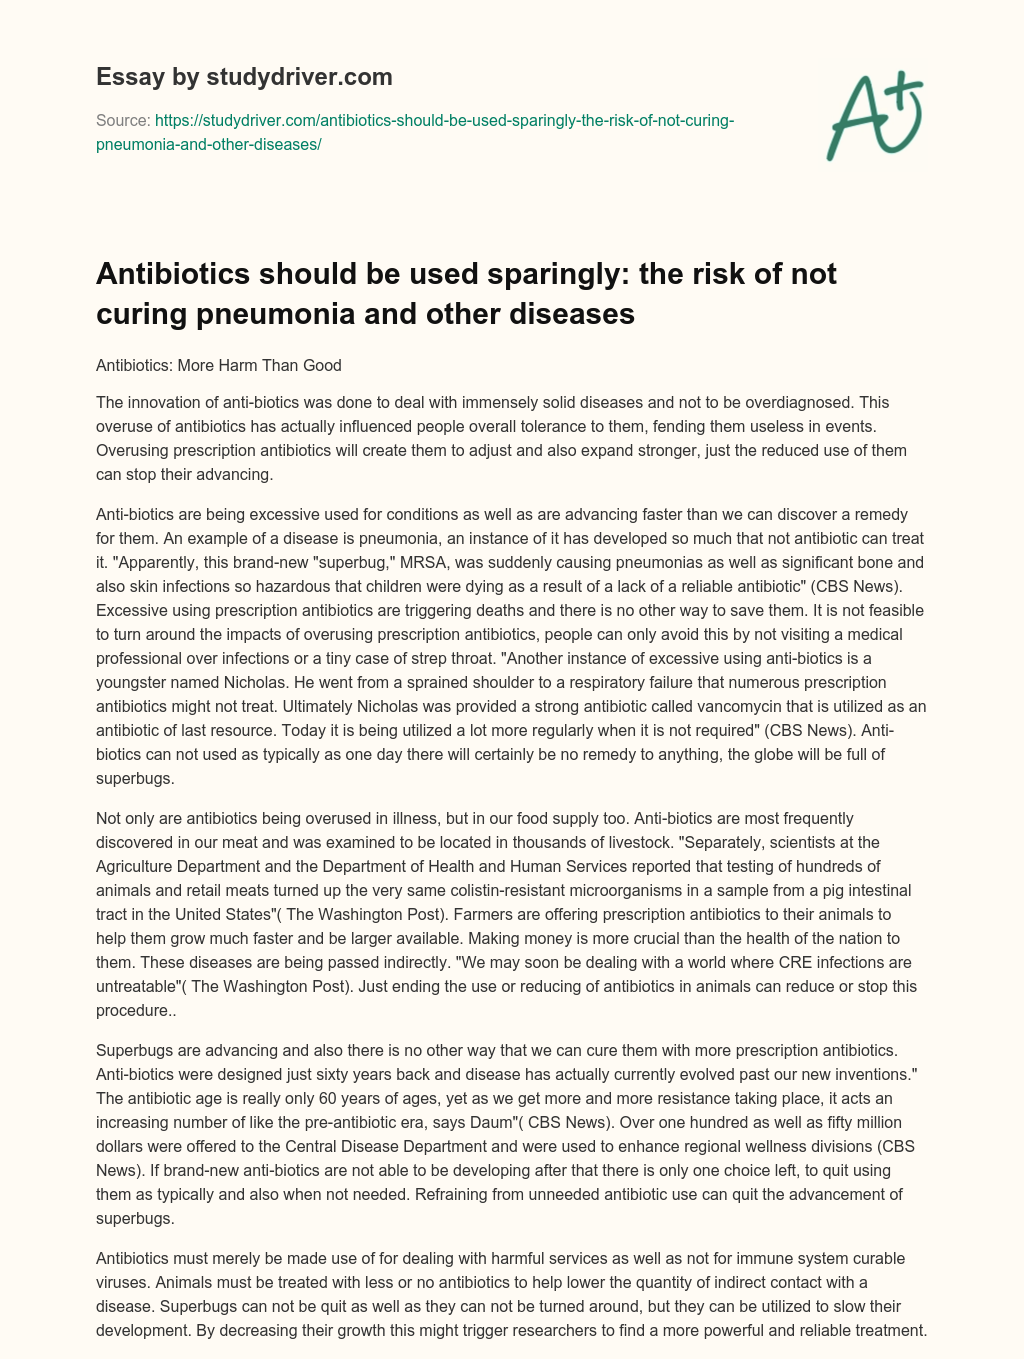 Antibiotics should be Used Sparingly: the Risk of not Curing Pneumonia and other Diseases essay